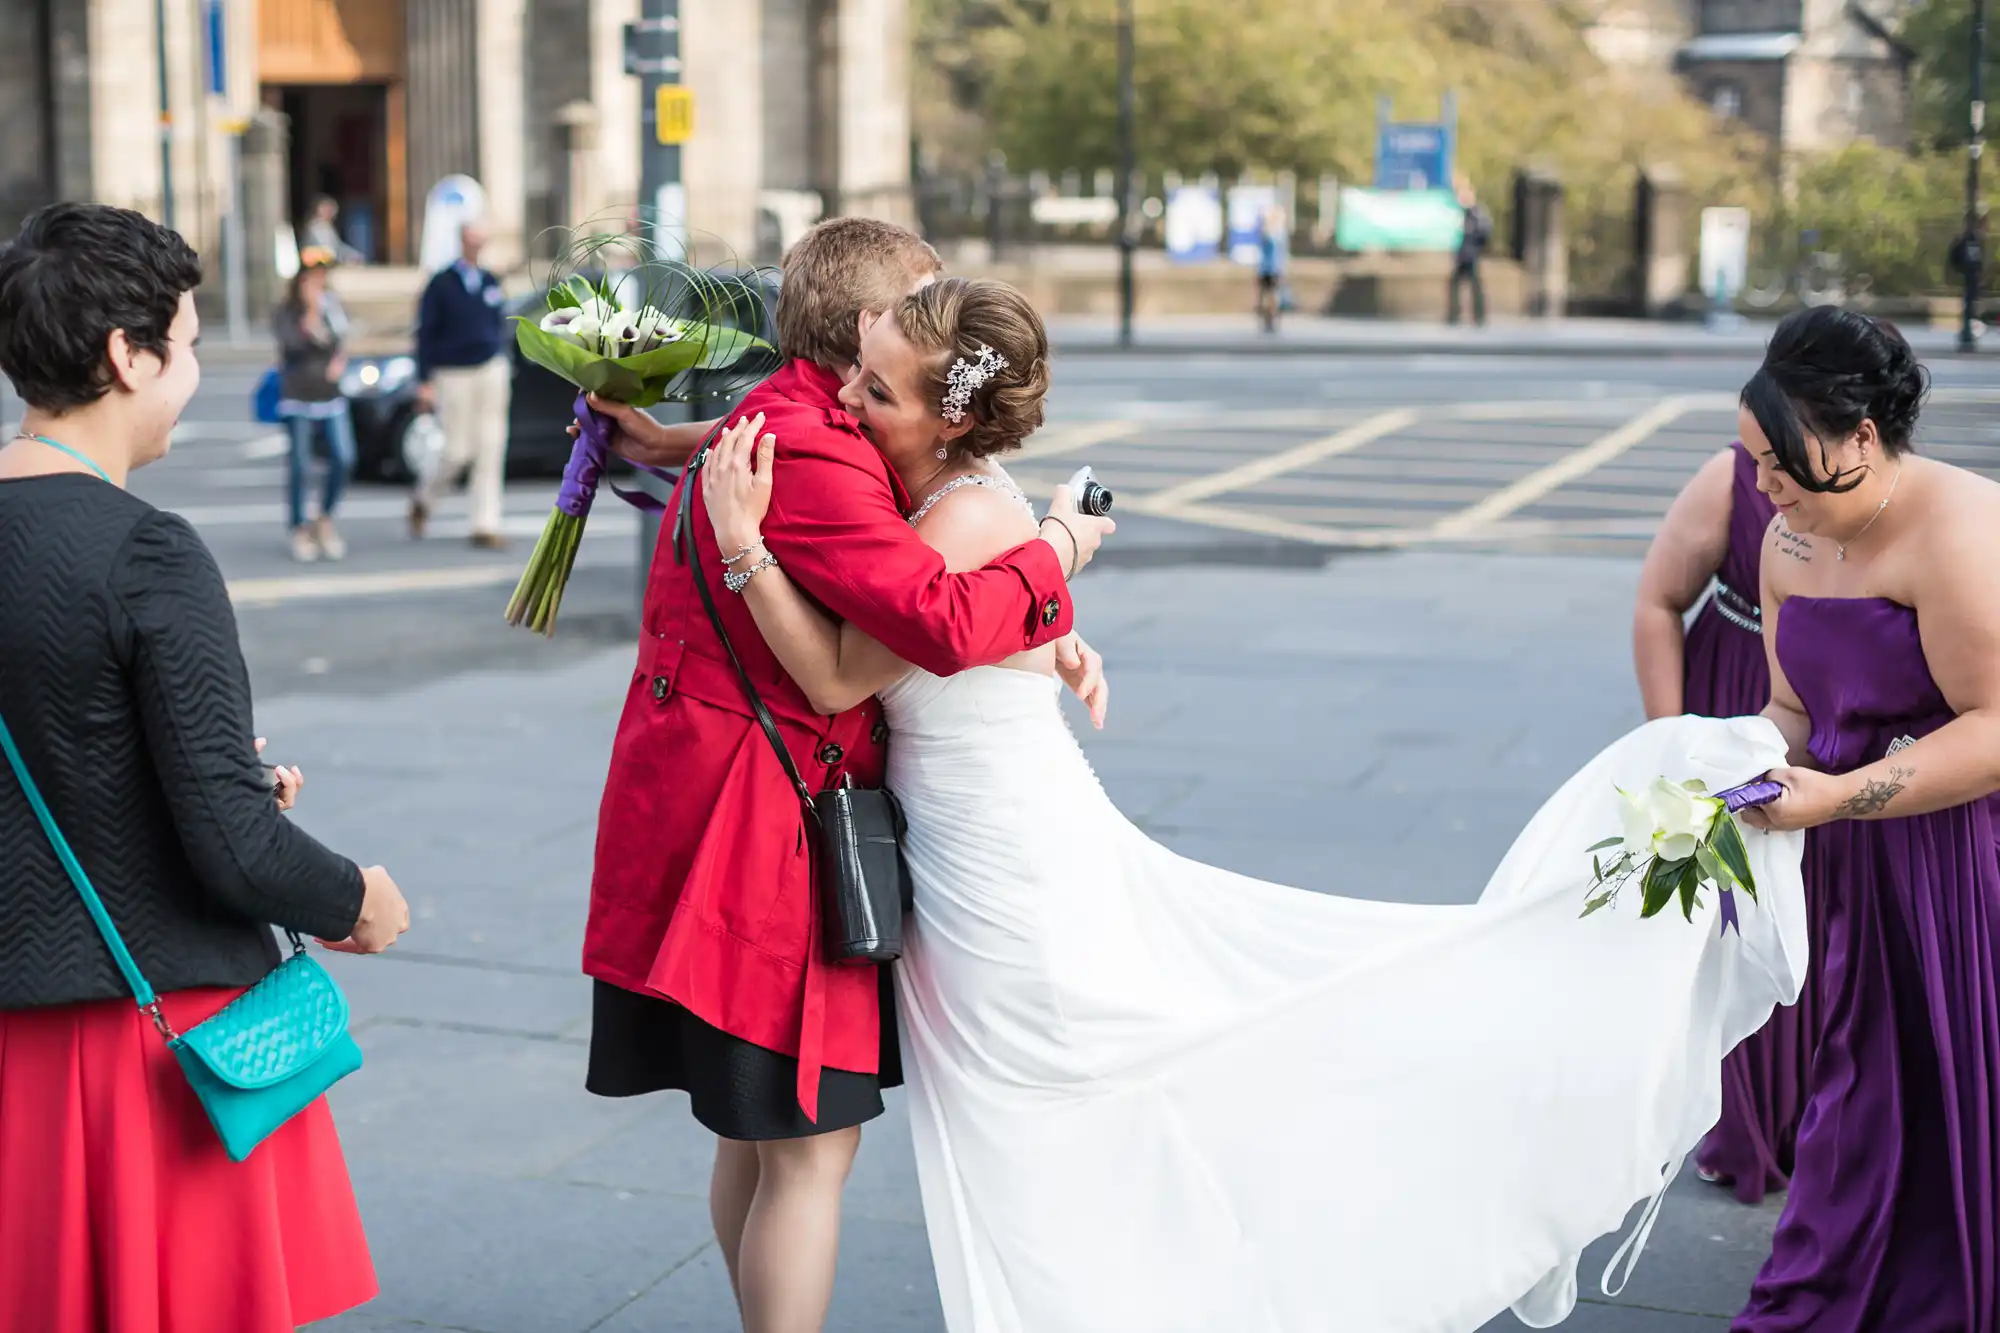 A bride and groom embrace on a city street, surrounded by guests in colorful attire, as one bridesmaid holds the bride's long train.